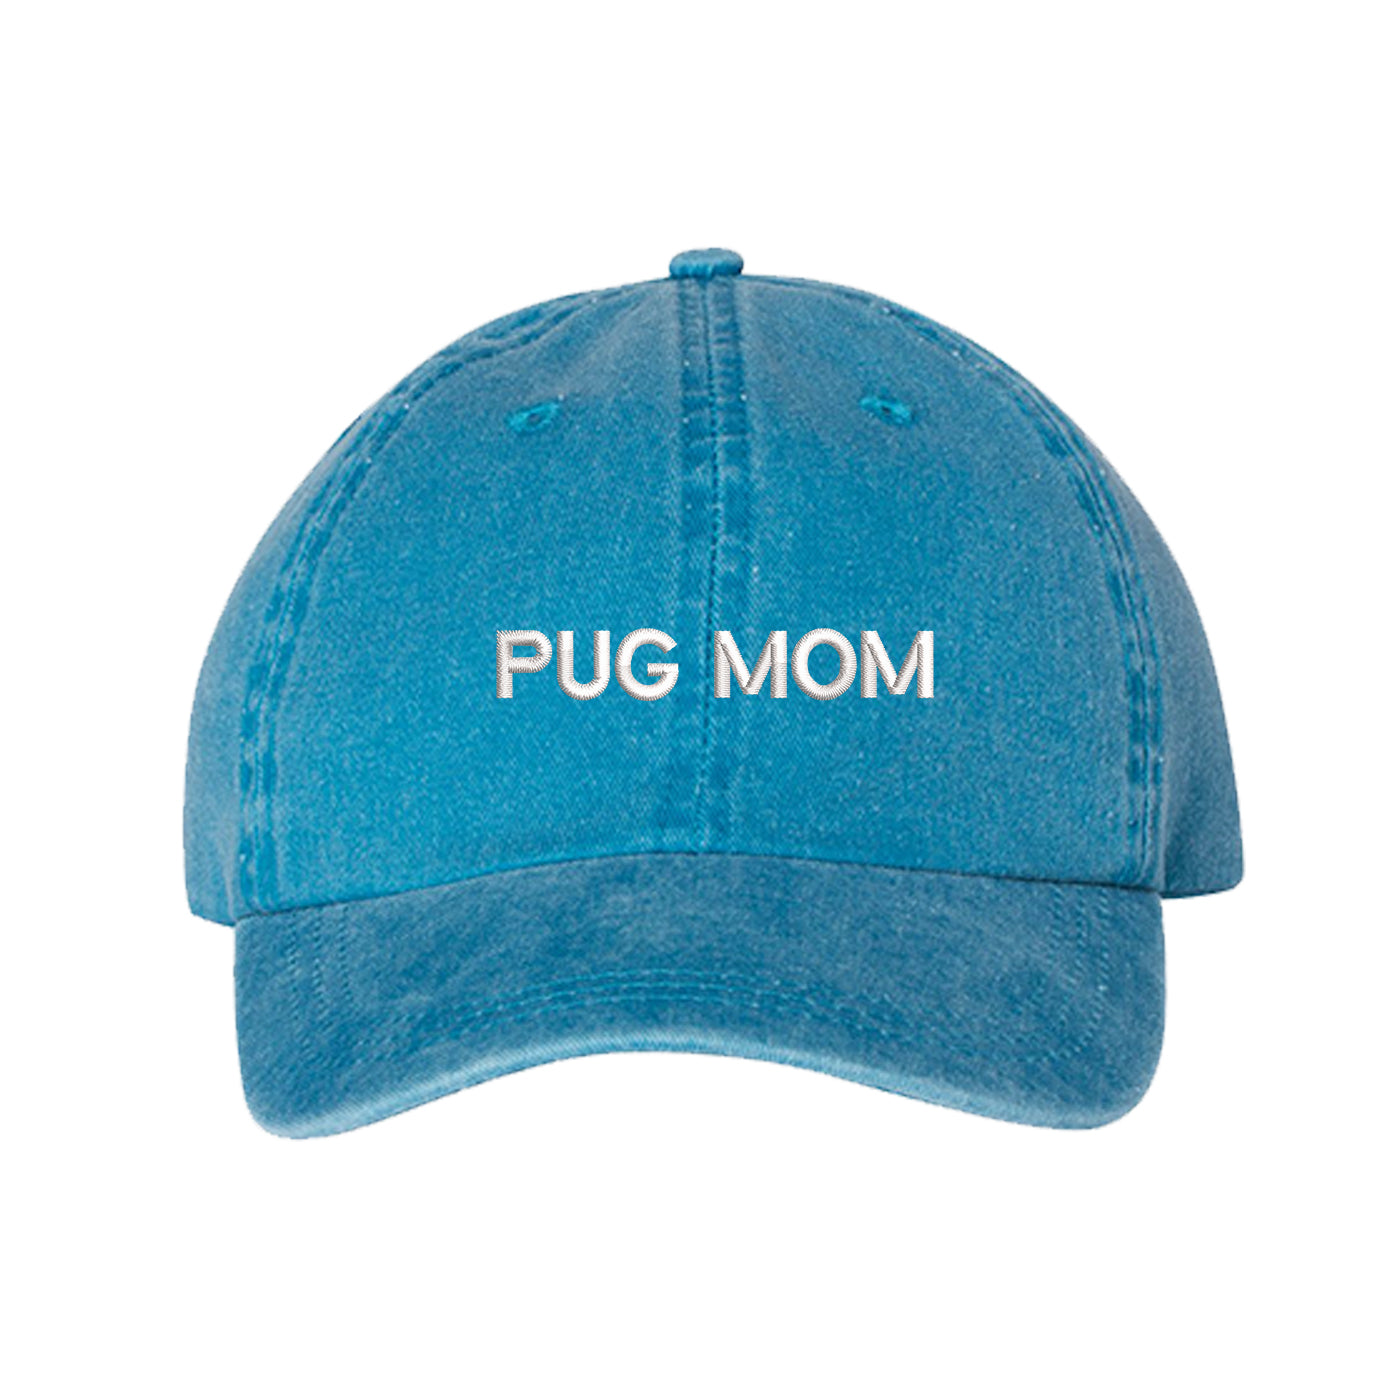 Pug Mom Washed Baseball Hat, Pug Mom Dad Hat, Dog Parent Hats, Embroidered Dad hat, Animal Lover Gifts, Pug Mother, Mothers Day Gift, Pug Mama, DSY Lifestyle Dad Hats, Turquoise Washed Baseball Hat